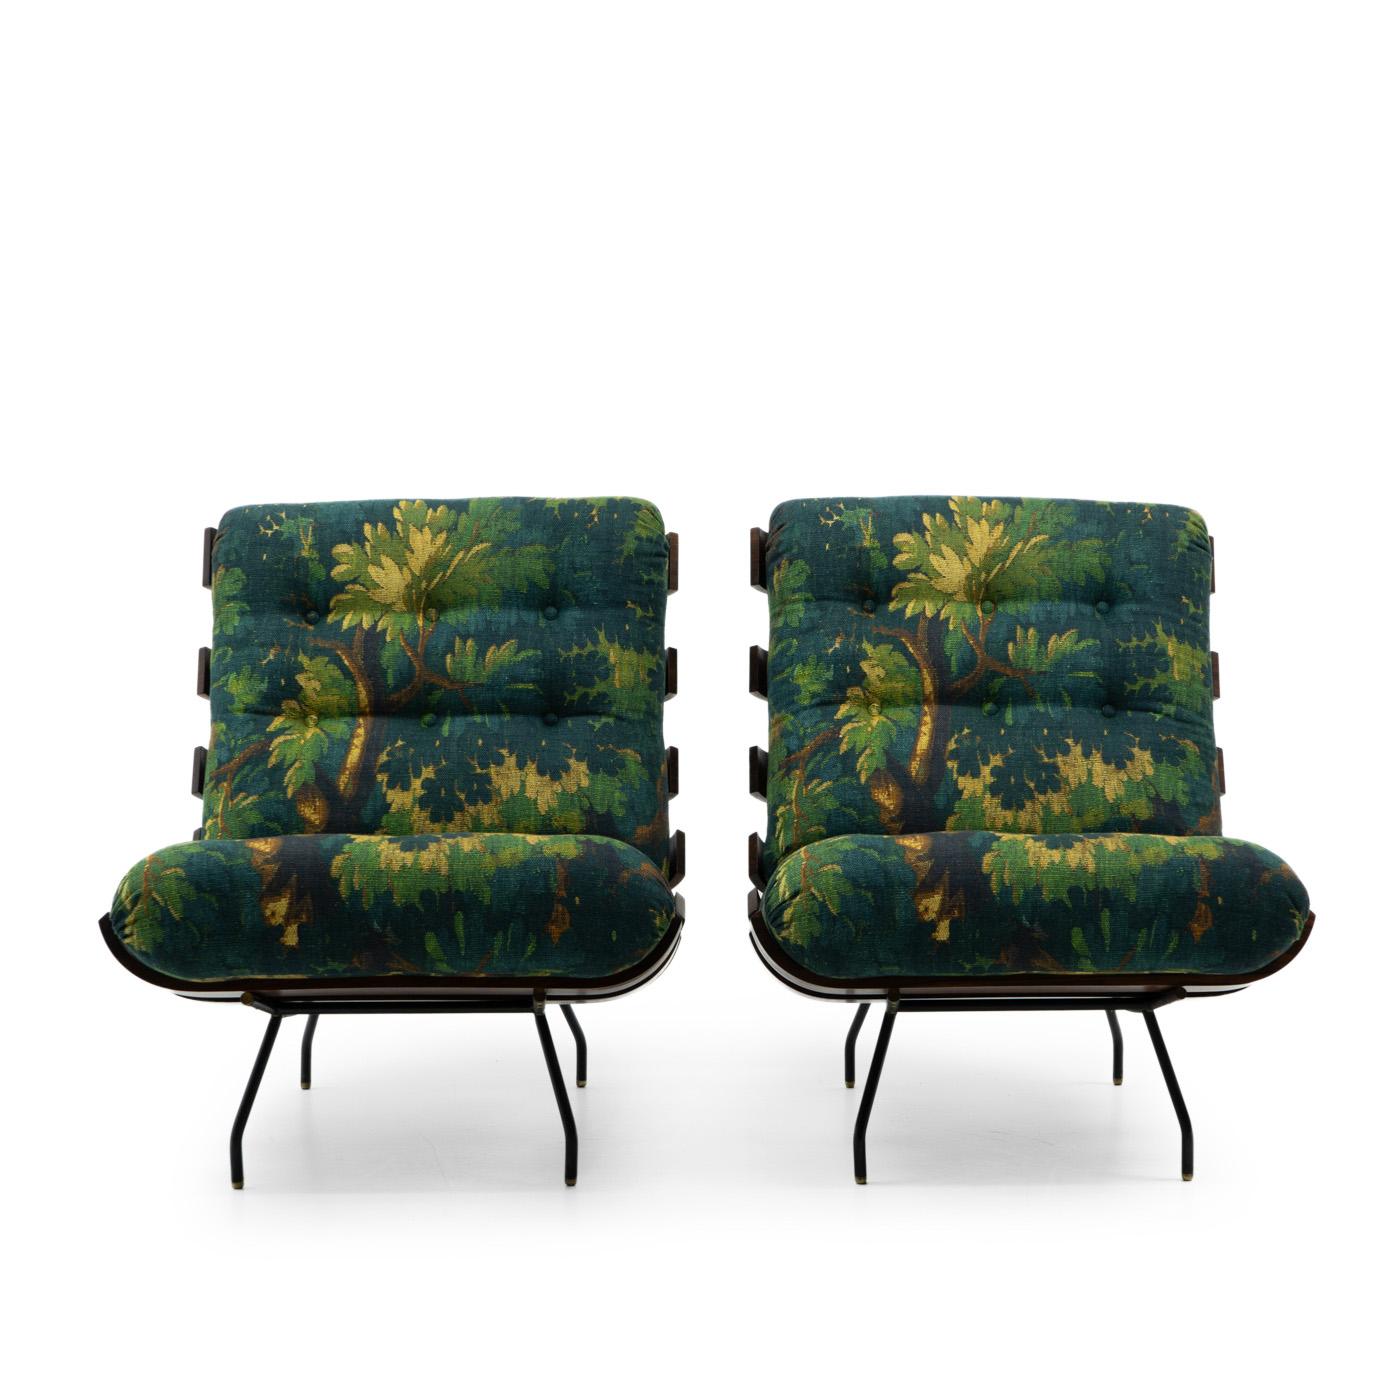 The Costela (Rib) chairs and sofas by Carlo Hauner and Martin Eisler became an instant success after their introduction in the Brazilian market, and it wasn’t for long that production was partly moved to Europe to meet the growing demand there.

The